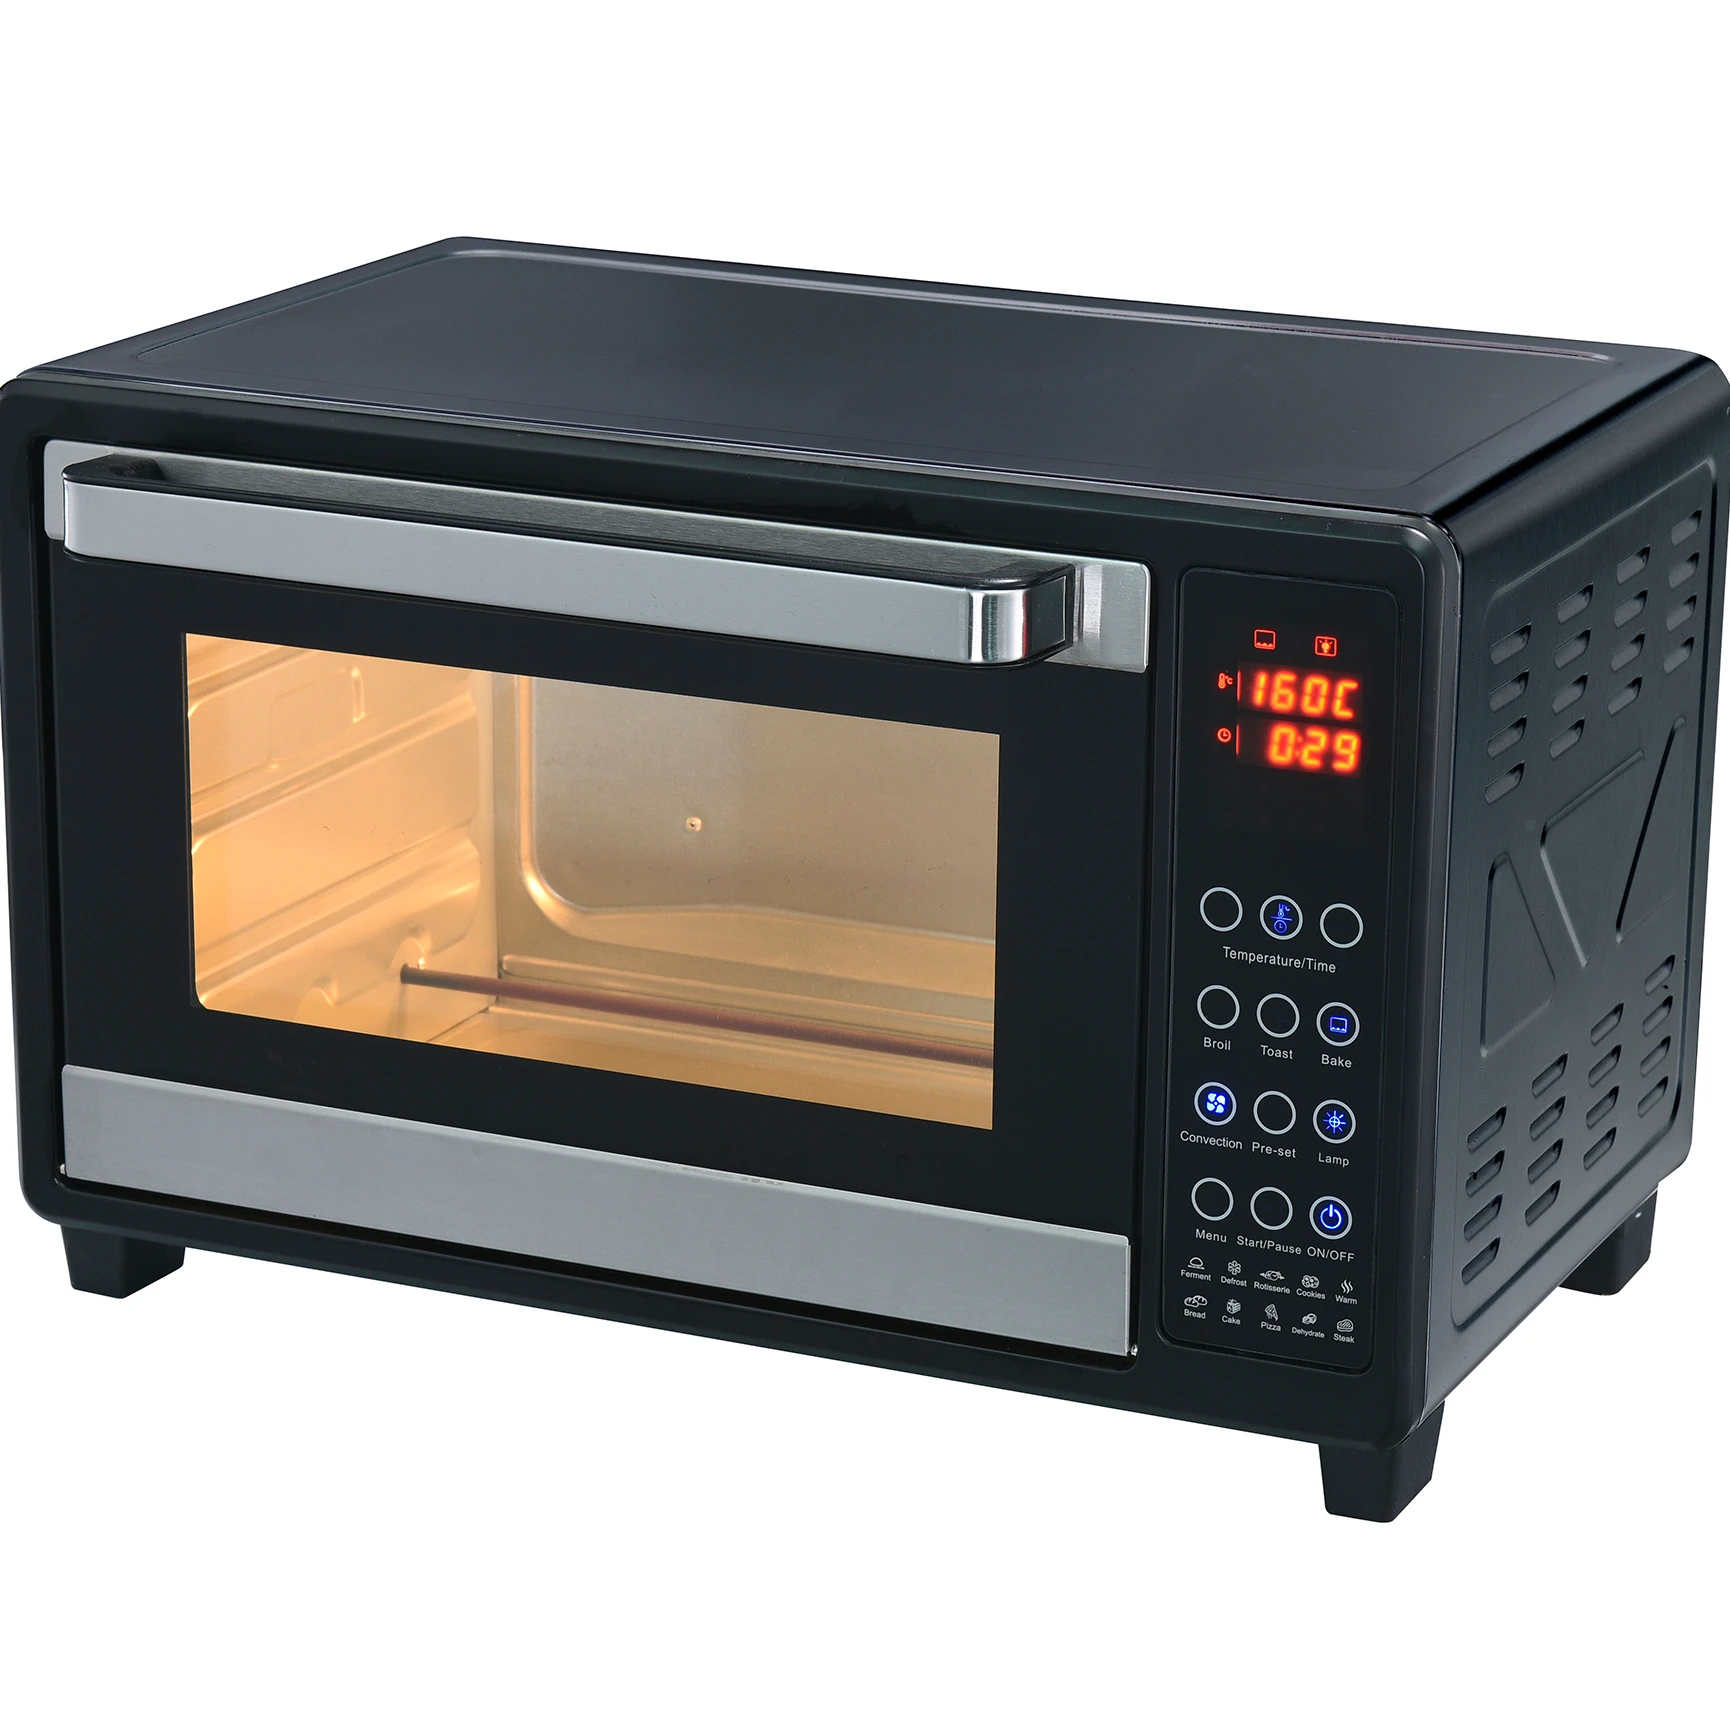 Posida 35l Large Capacity Digital Touch Control Oven Multifunctional - Buy Digital Oven,Electric Oven,Oven Product